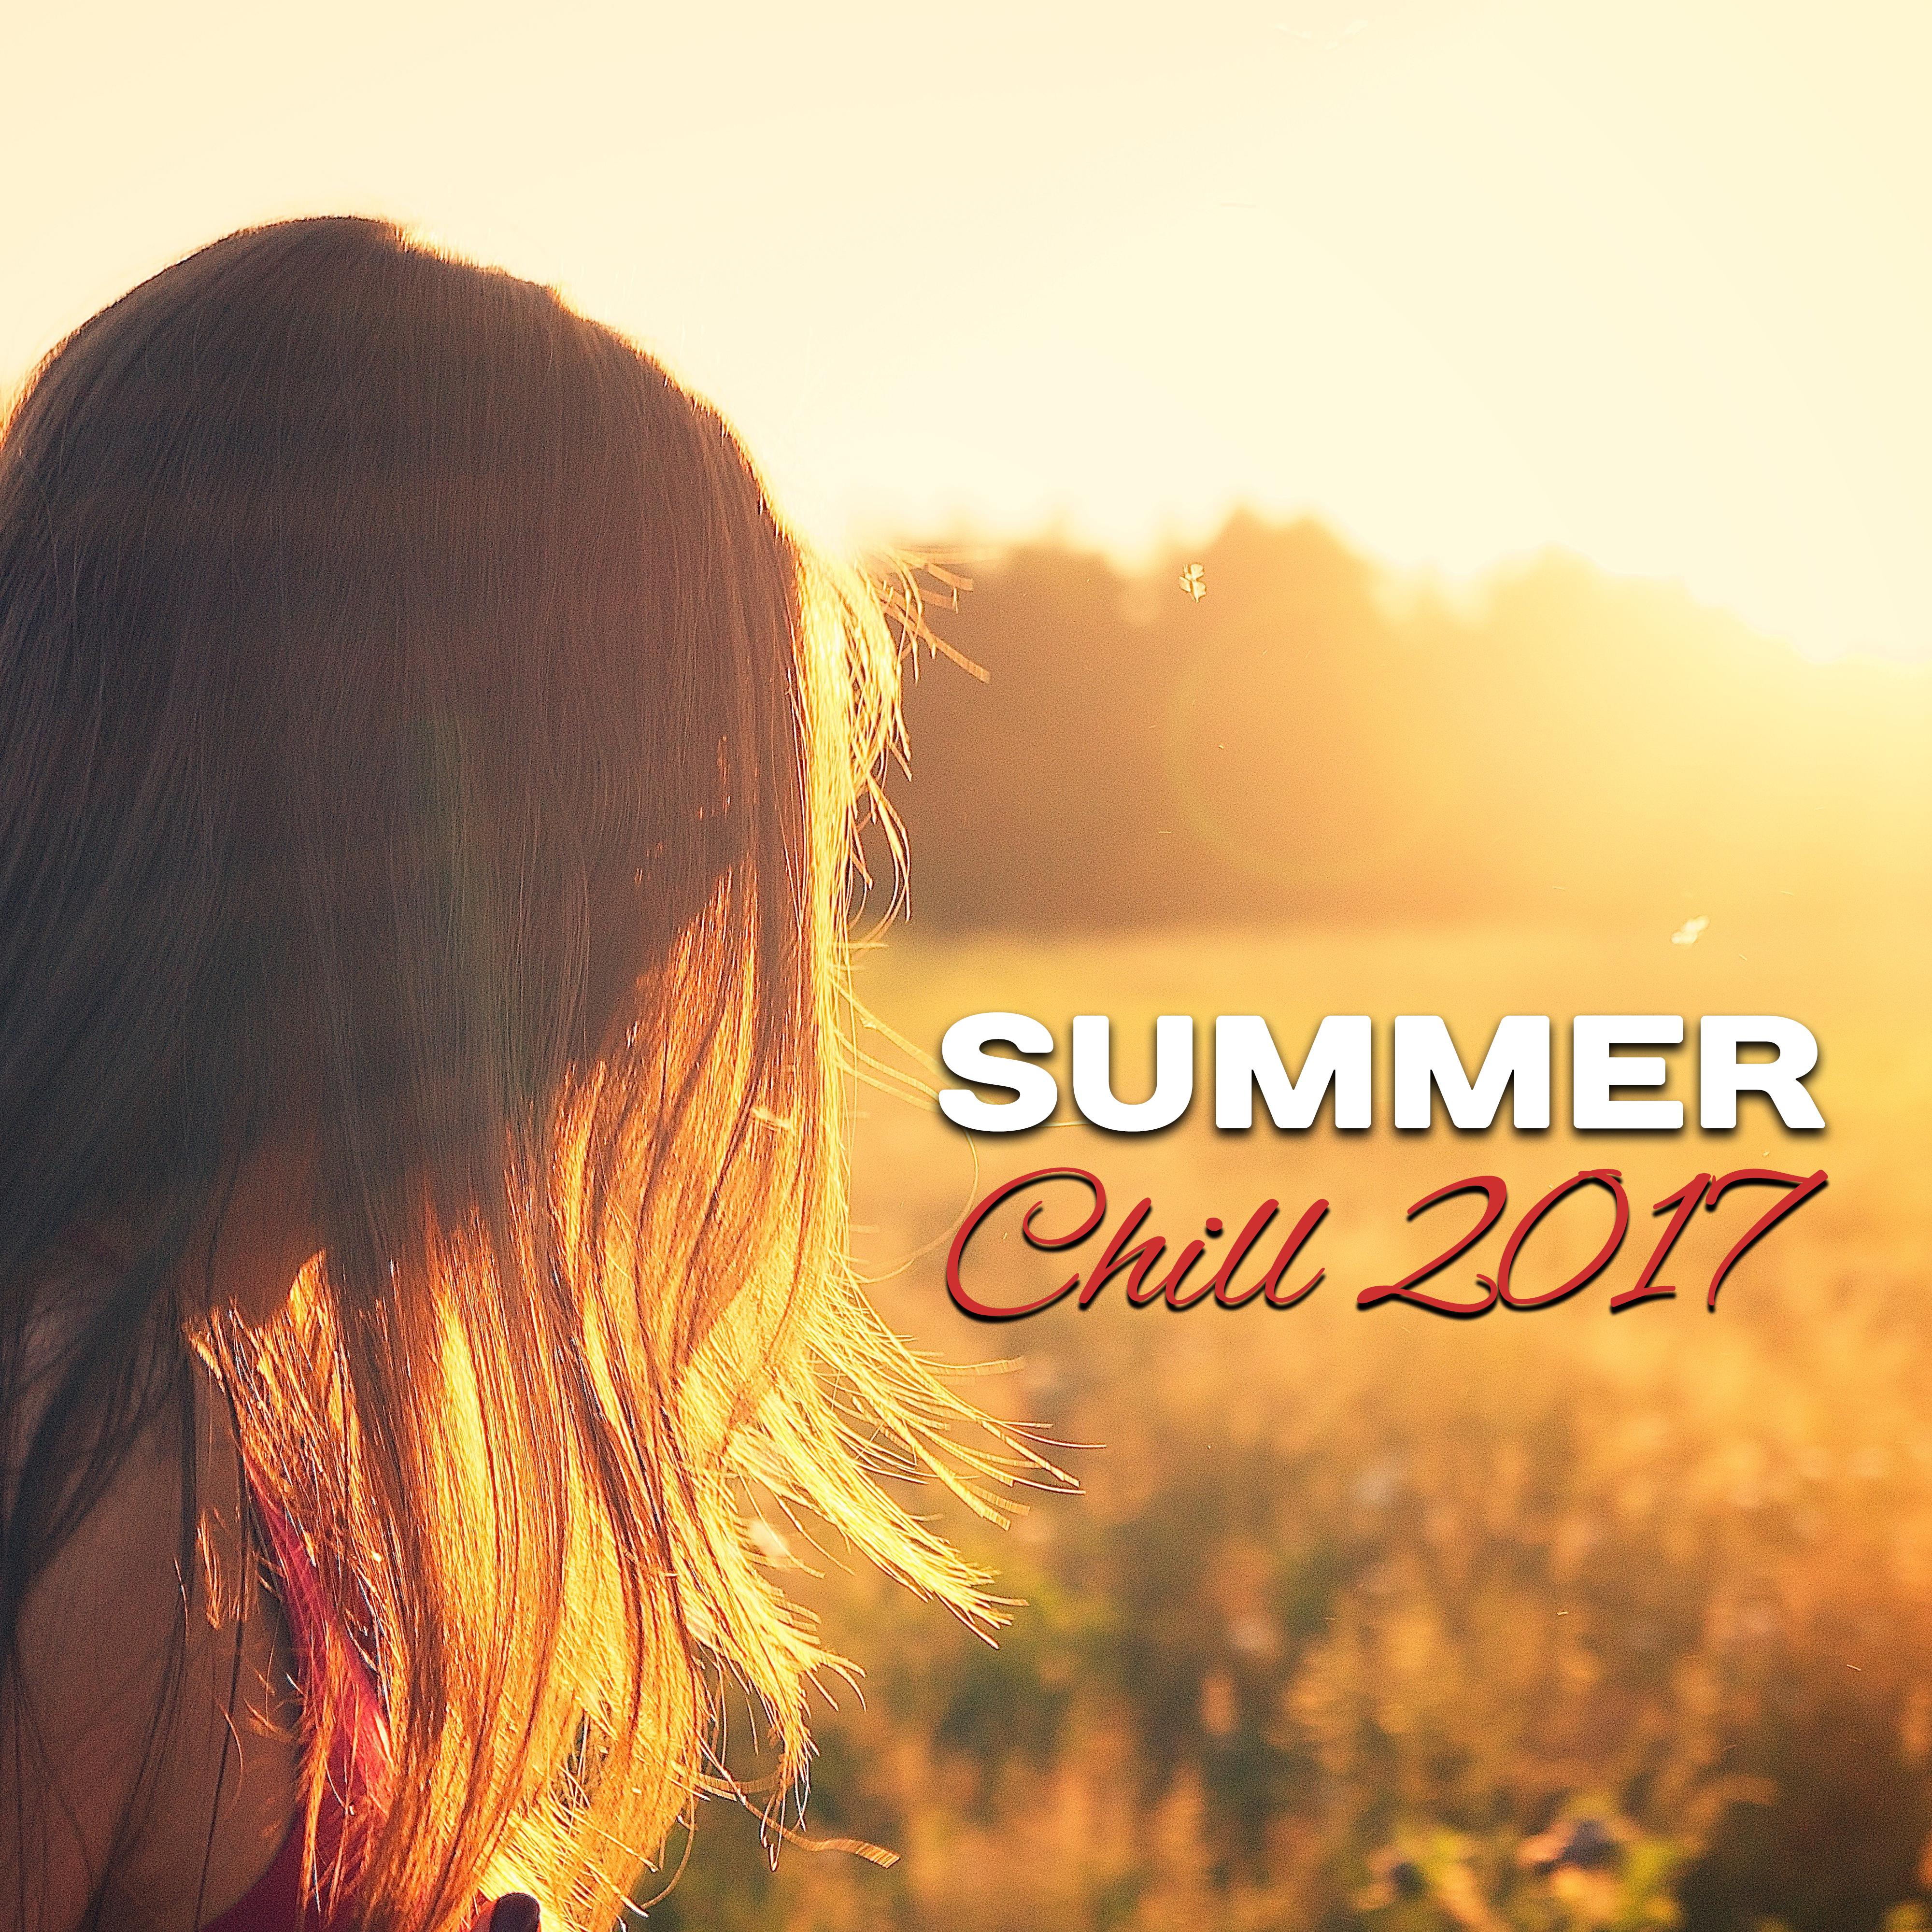 Summer Chill 2017  Holiday Songs, Hot Vibes, Rest with Chill Out Music, Waves of Calmness